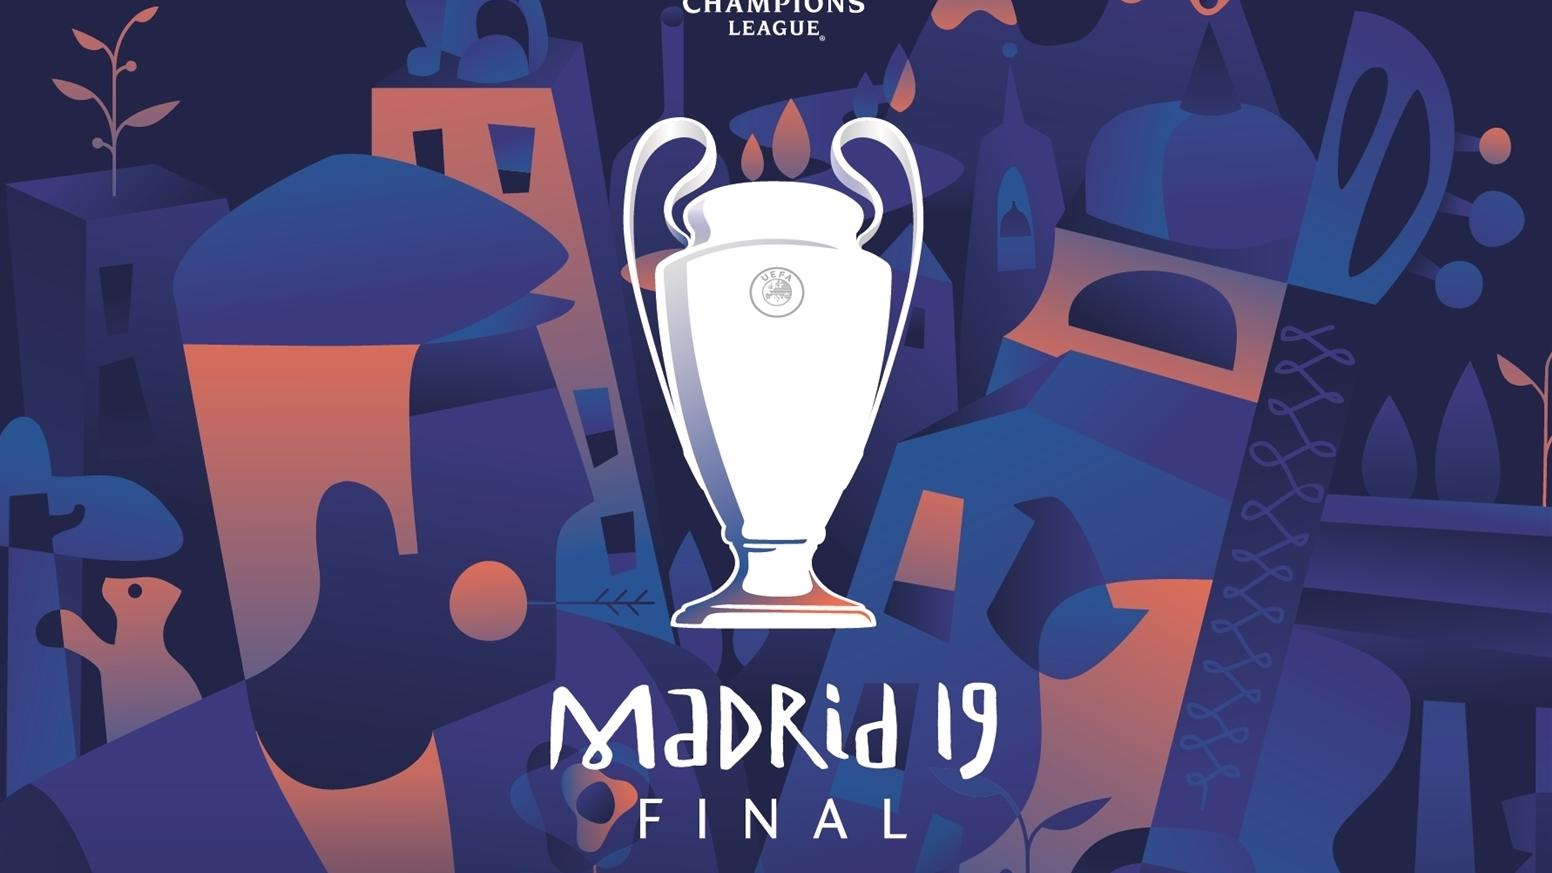 madrid champions league final tickets